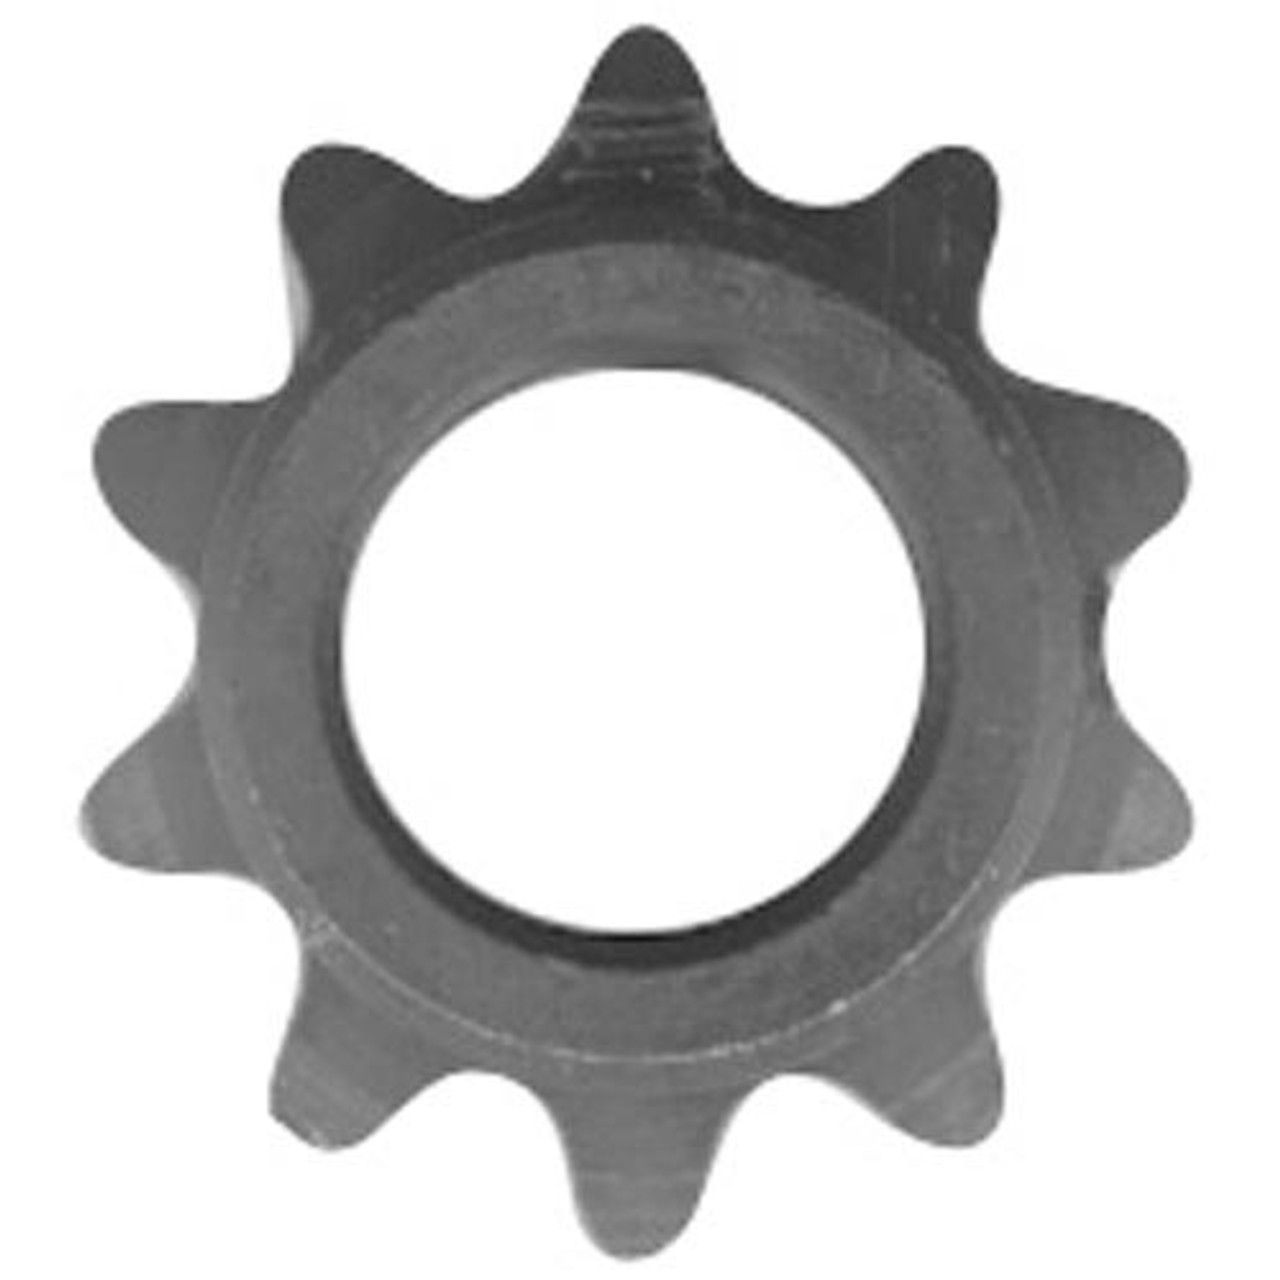  Lincoln 369158 Sprocket, 10 Tooth, S/N 4390 and Above